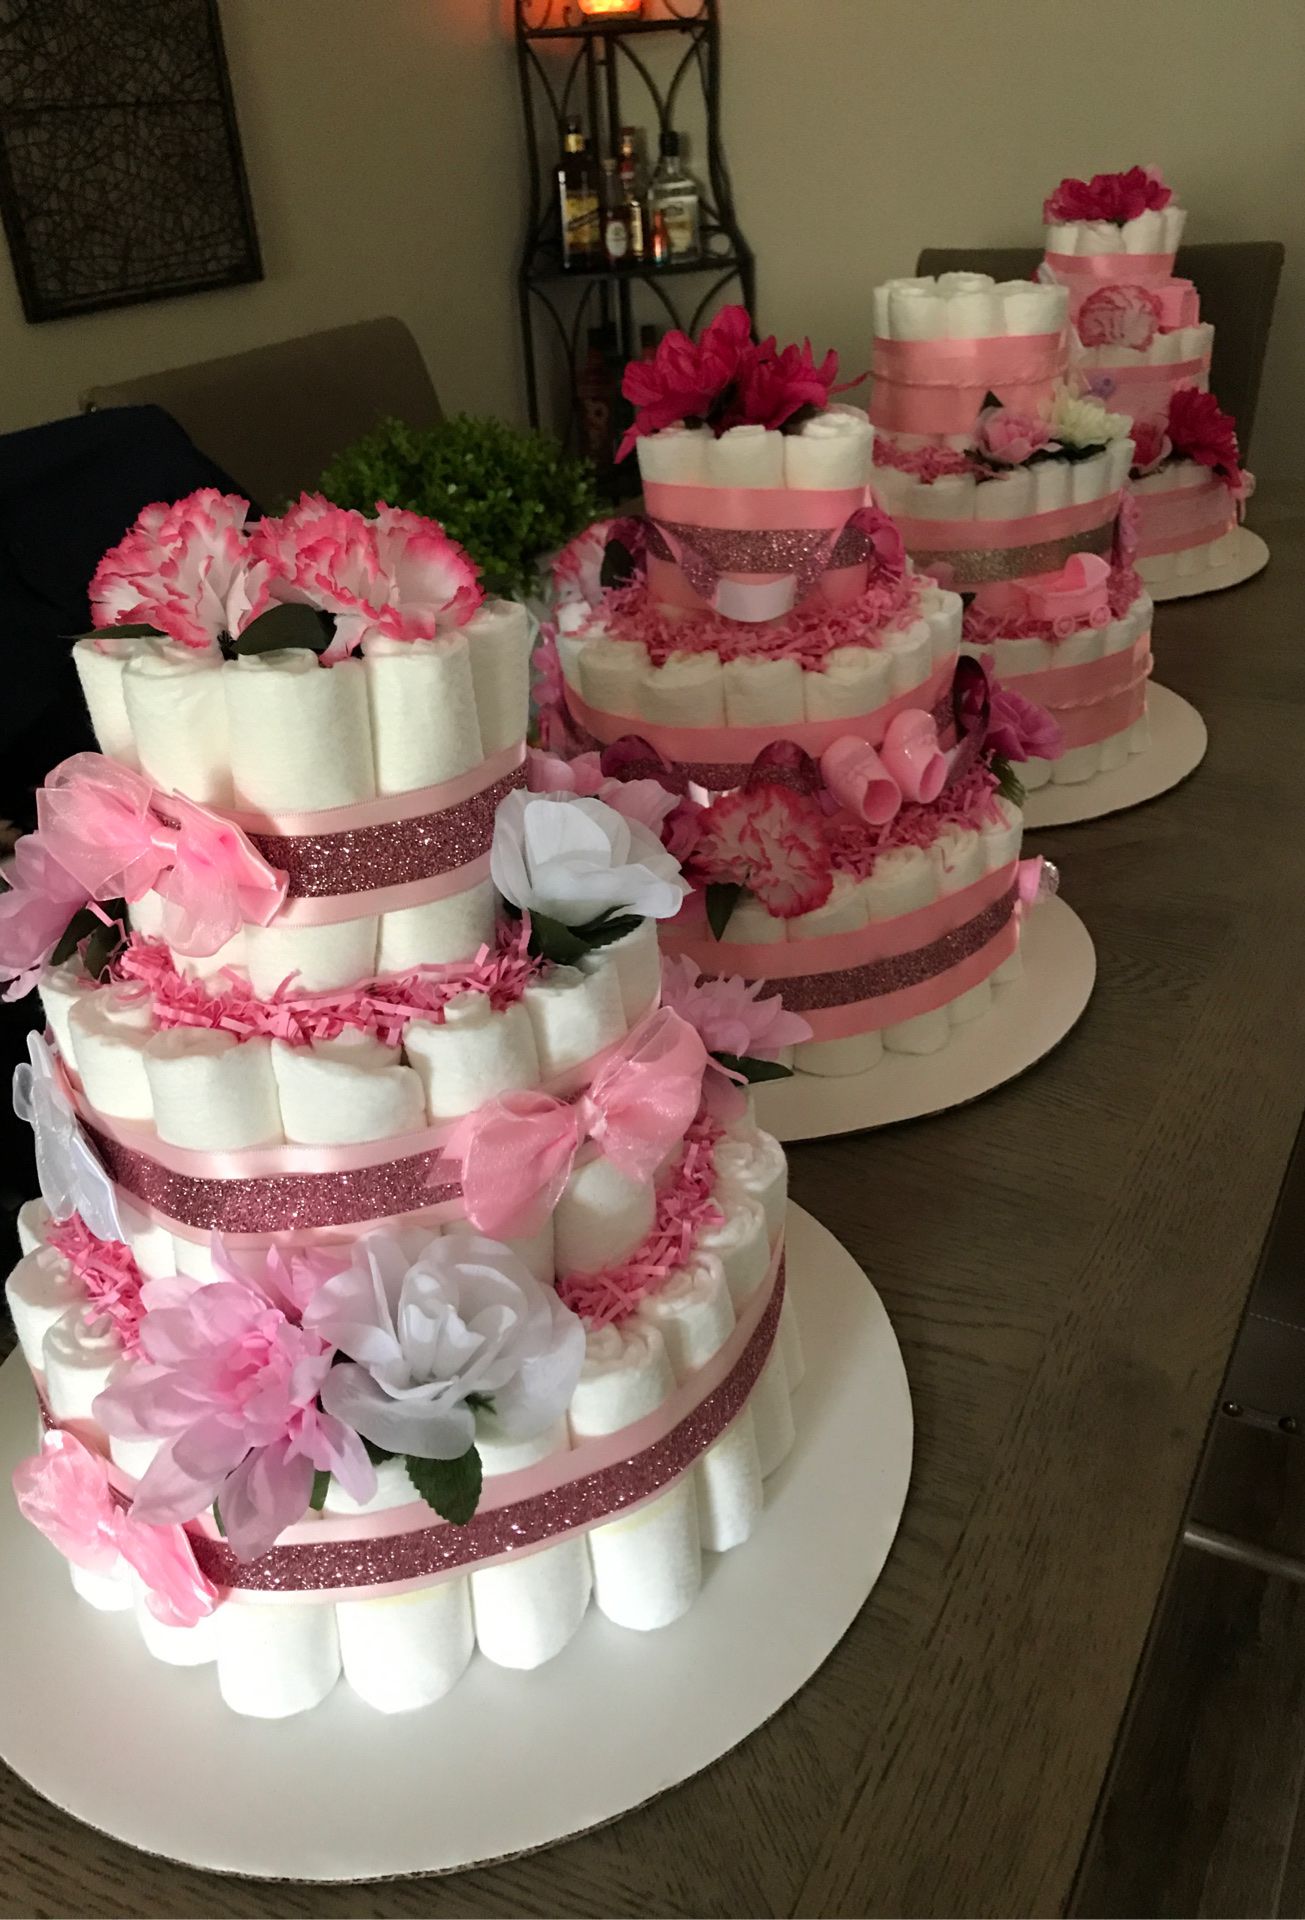 Handmade diaper cakes for GIRL each one is beautiful and different!